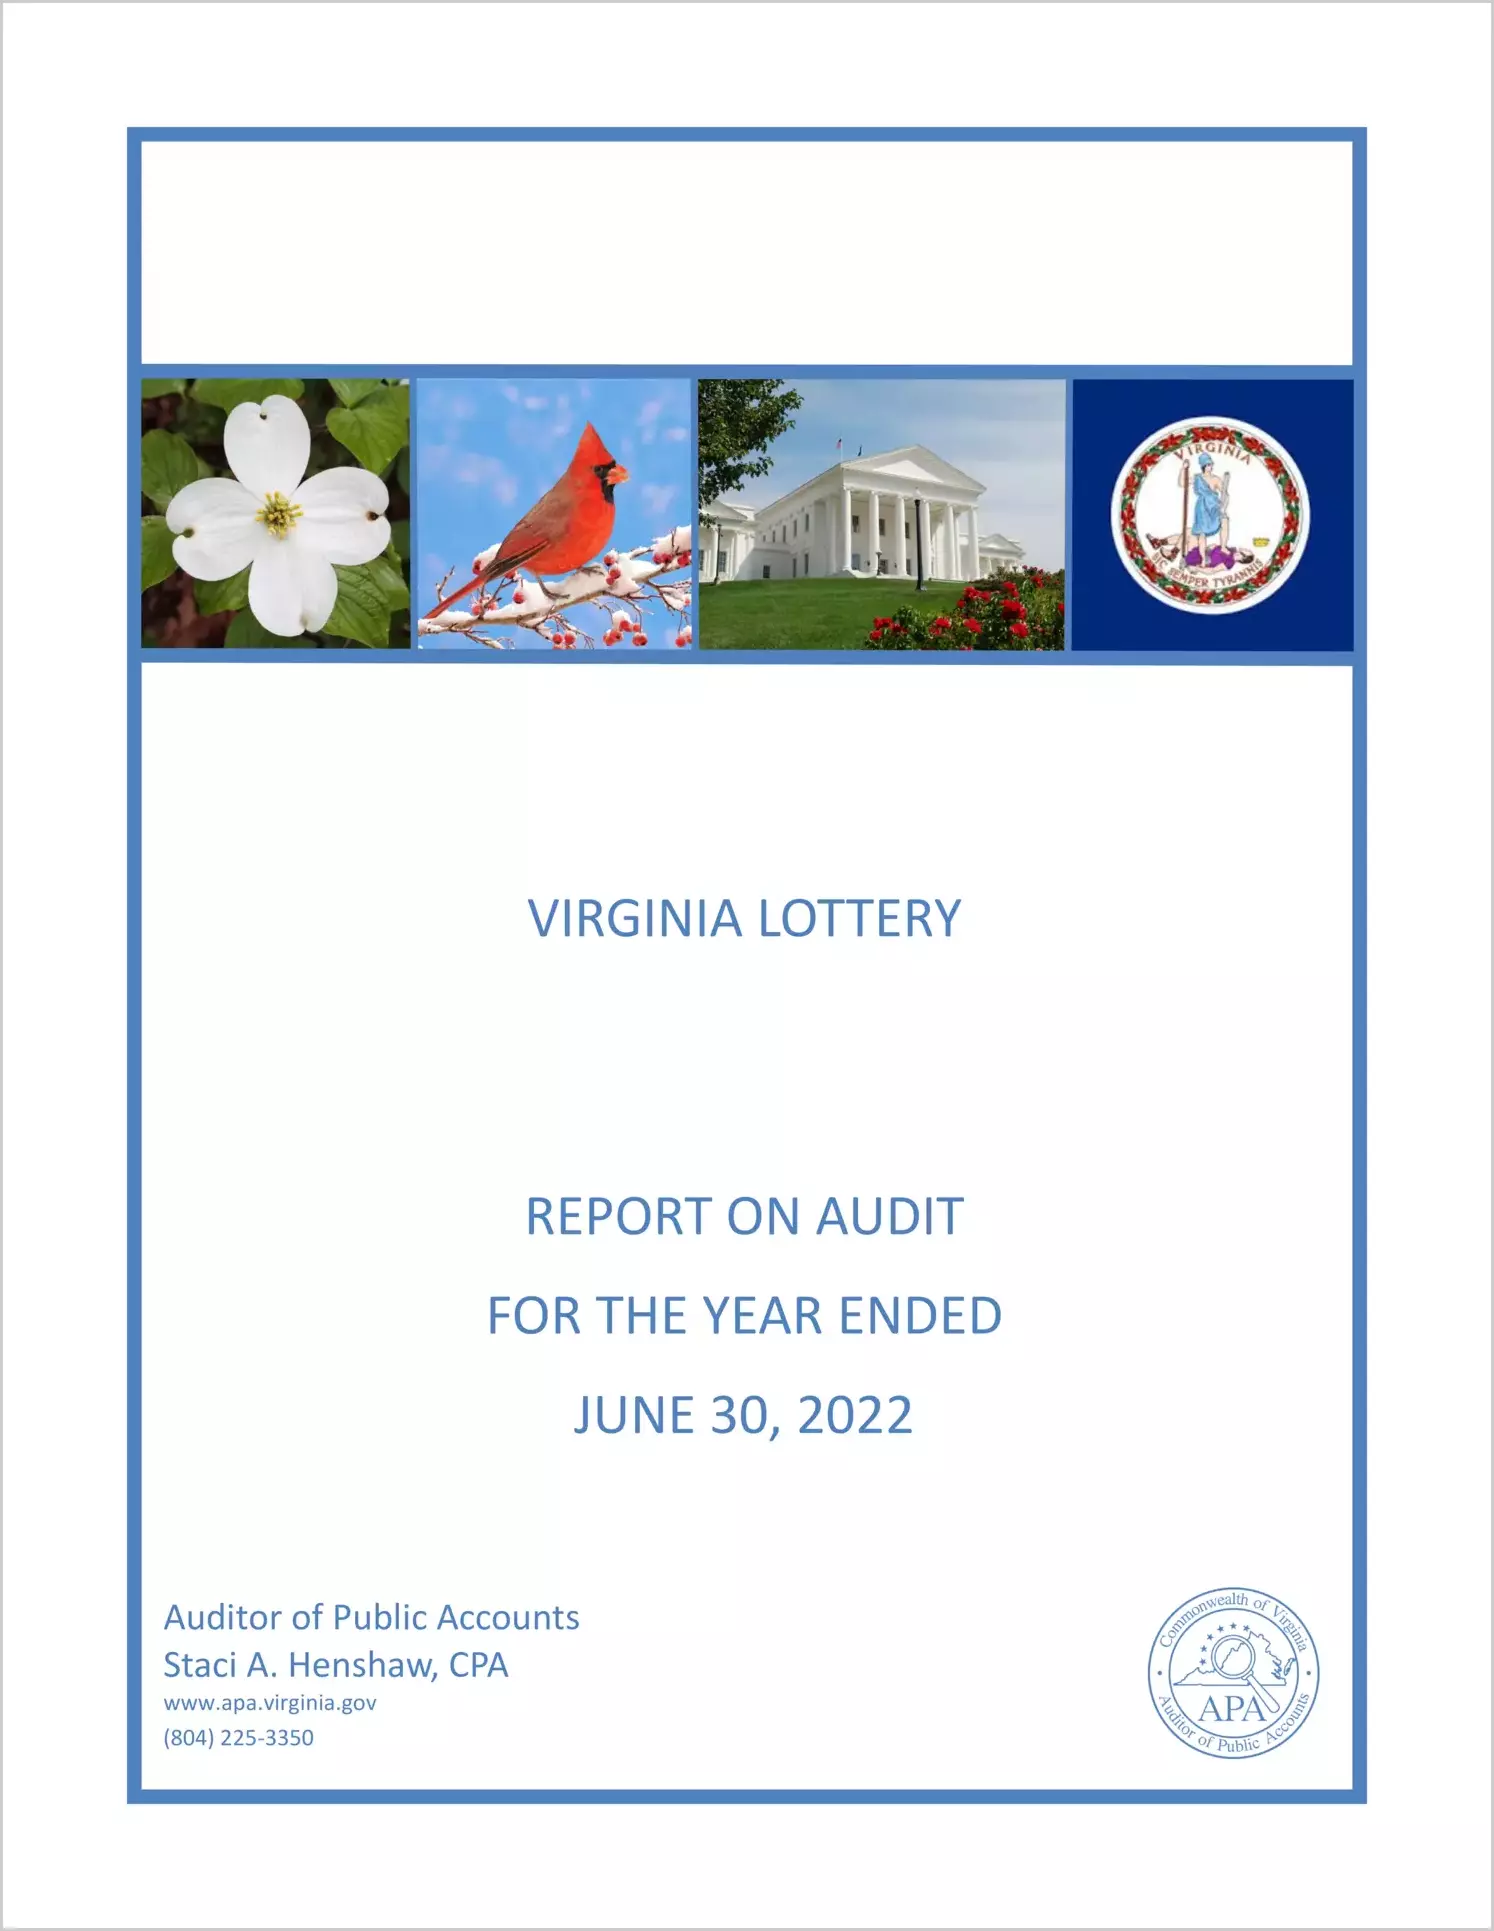 Virginia Lottery for the year ended June 30, 2022